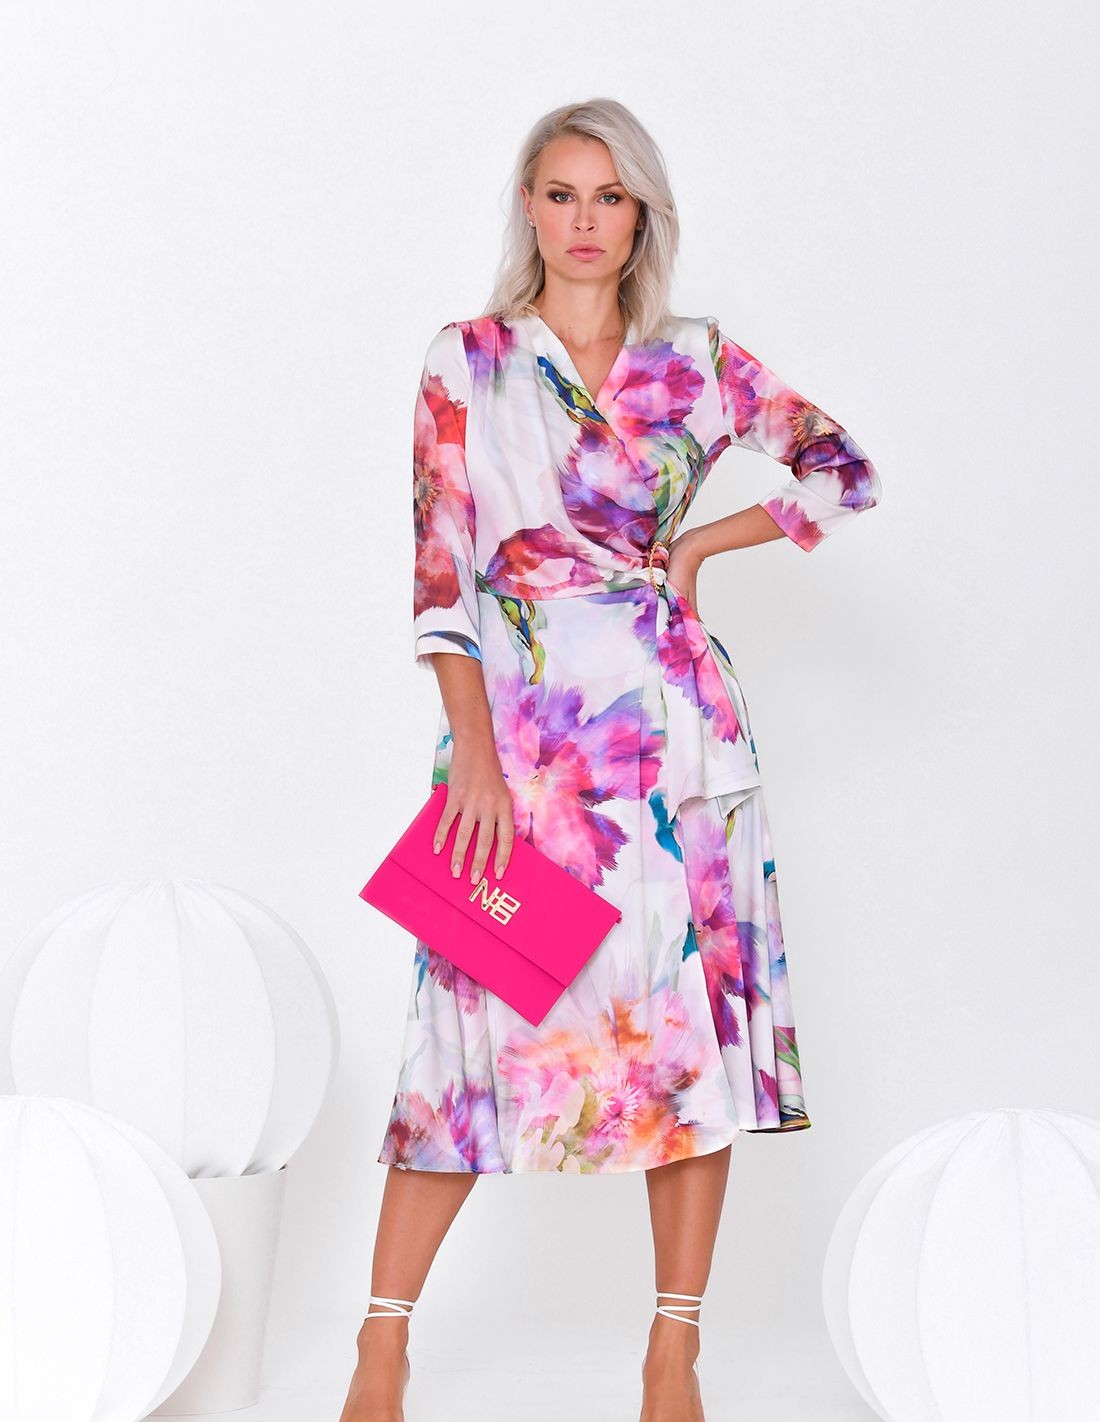 Floral print cocktail dress for events | INVITADISIMA